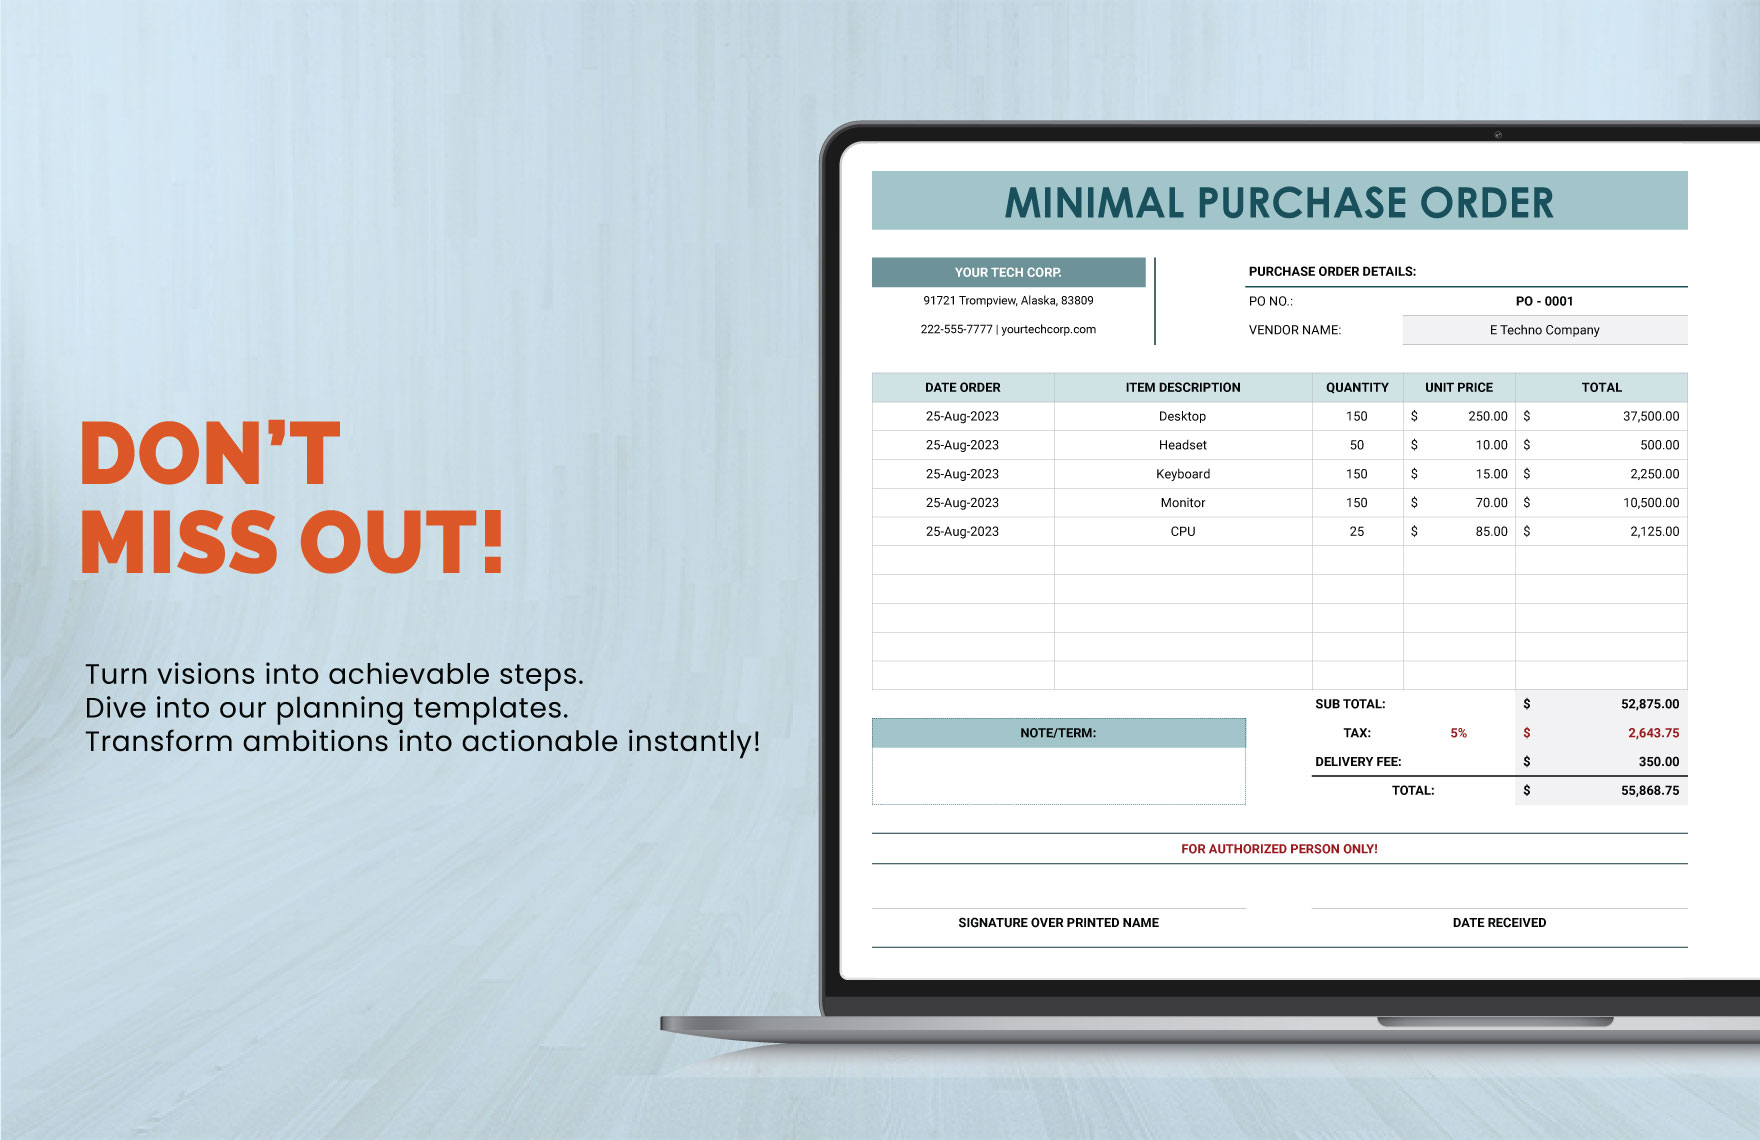 Minimal Purchase Order Template